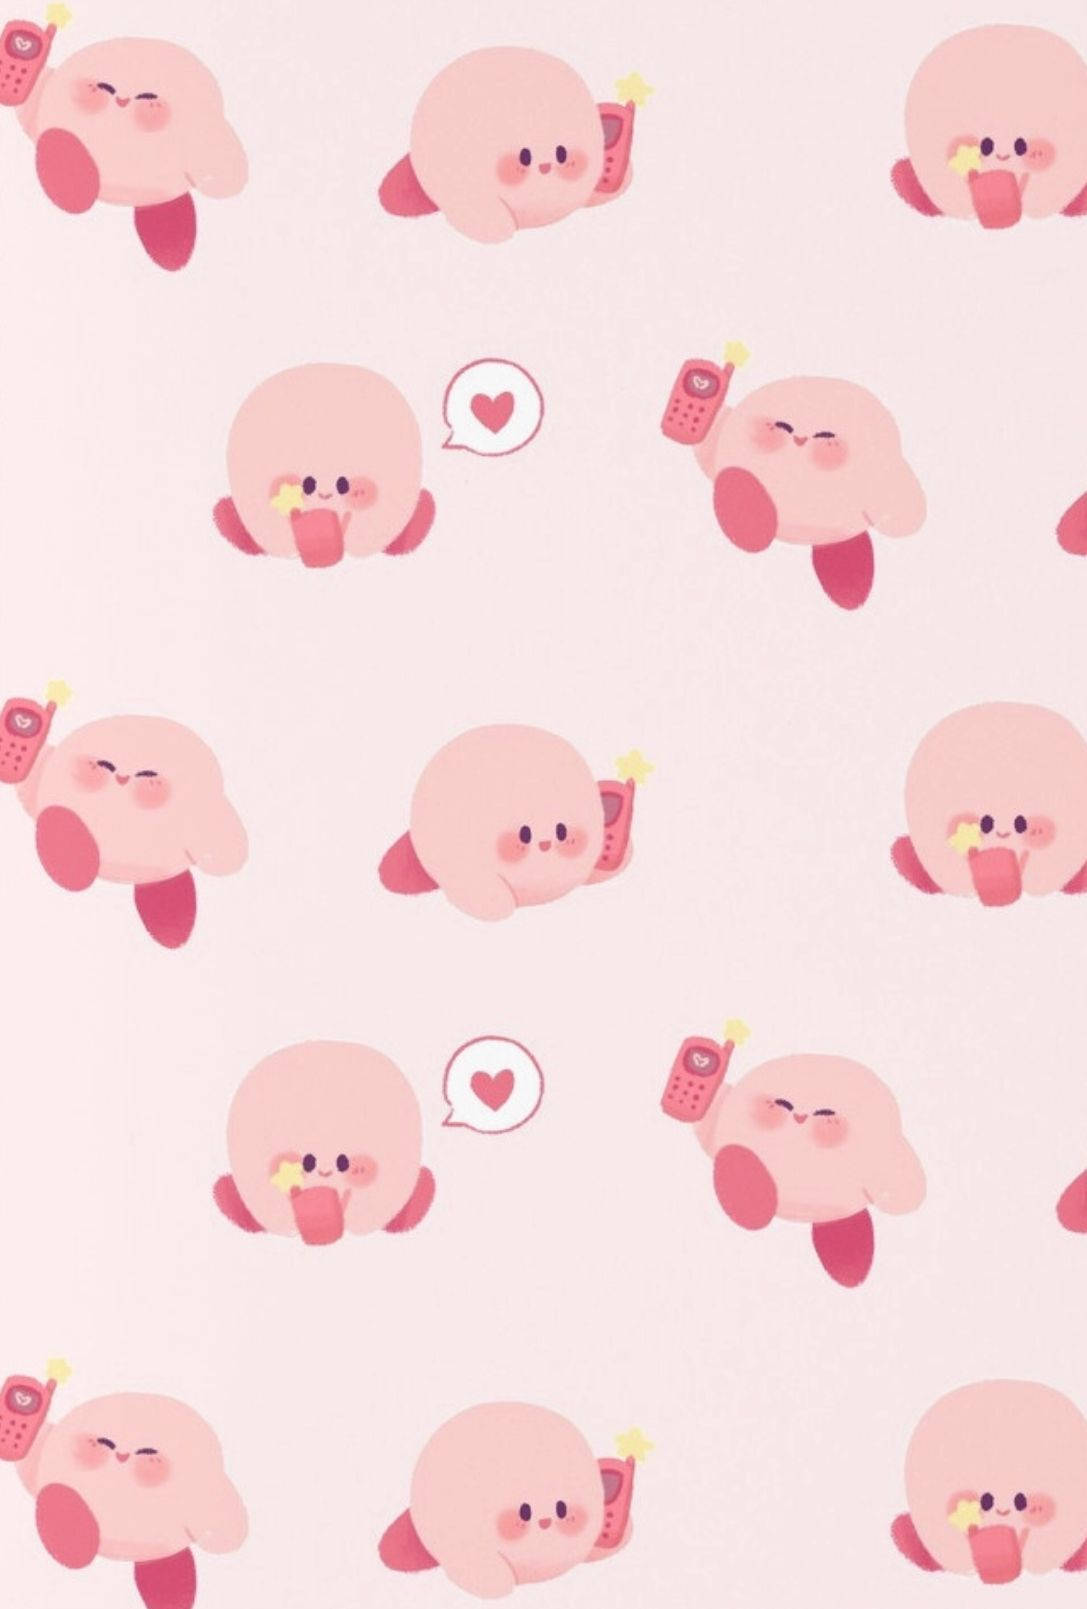 Pink Aesthetic Tumblr Laptop Background Display Background